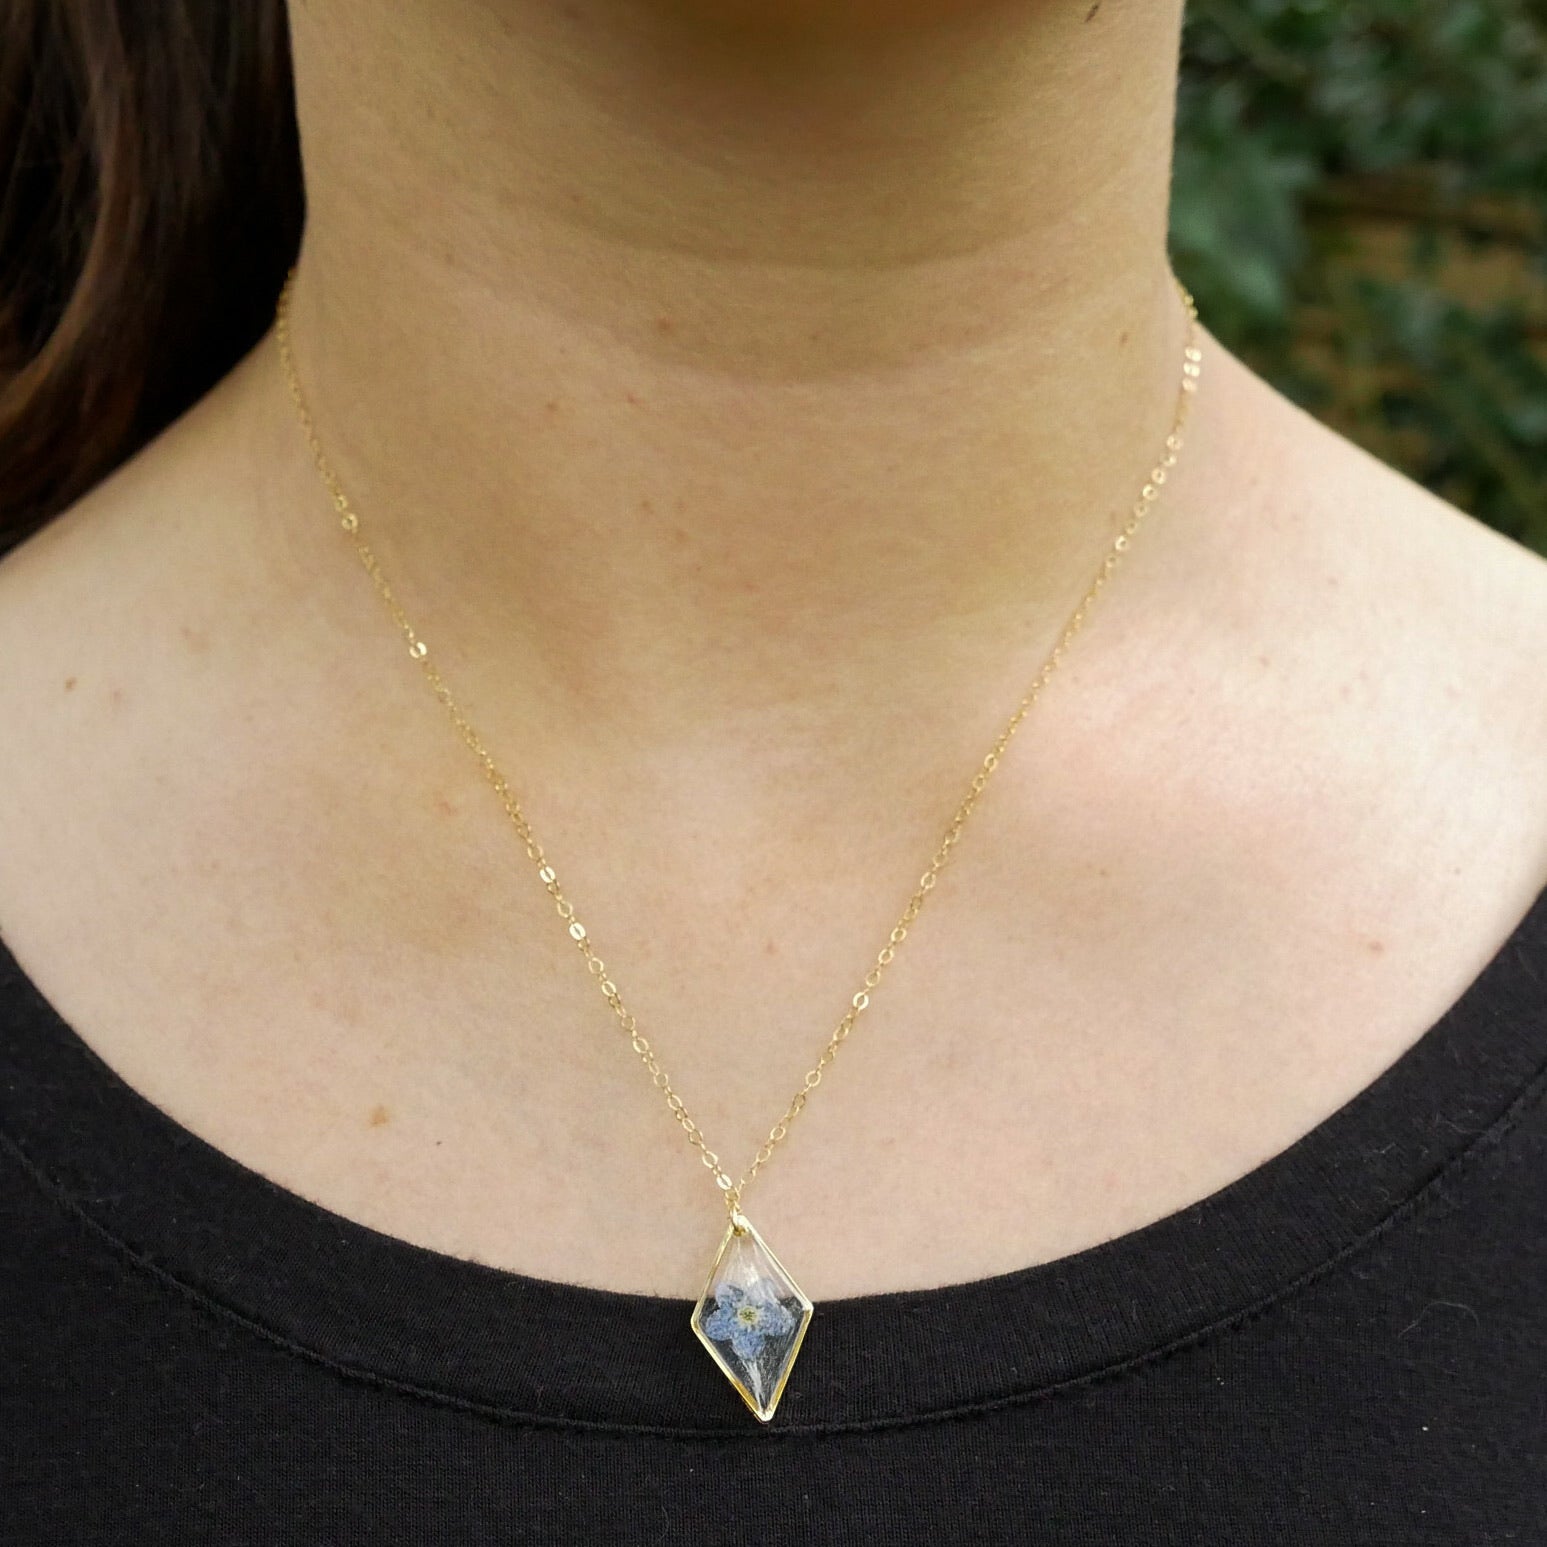 Forget me not Diamond necklace